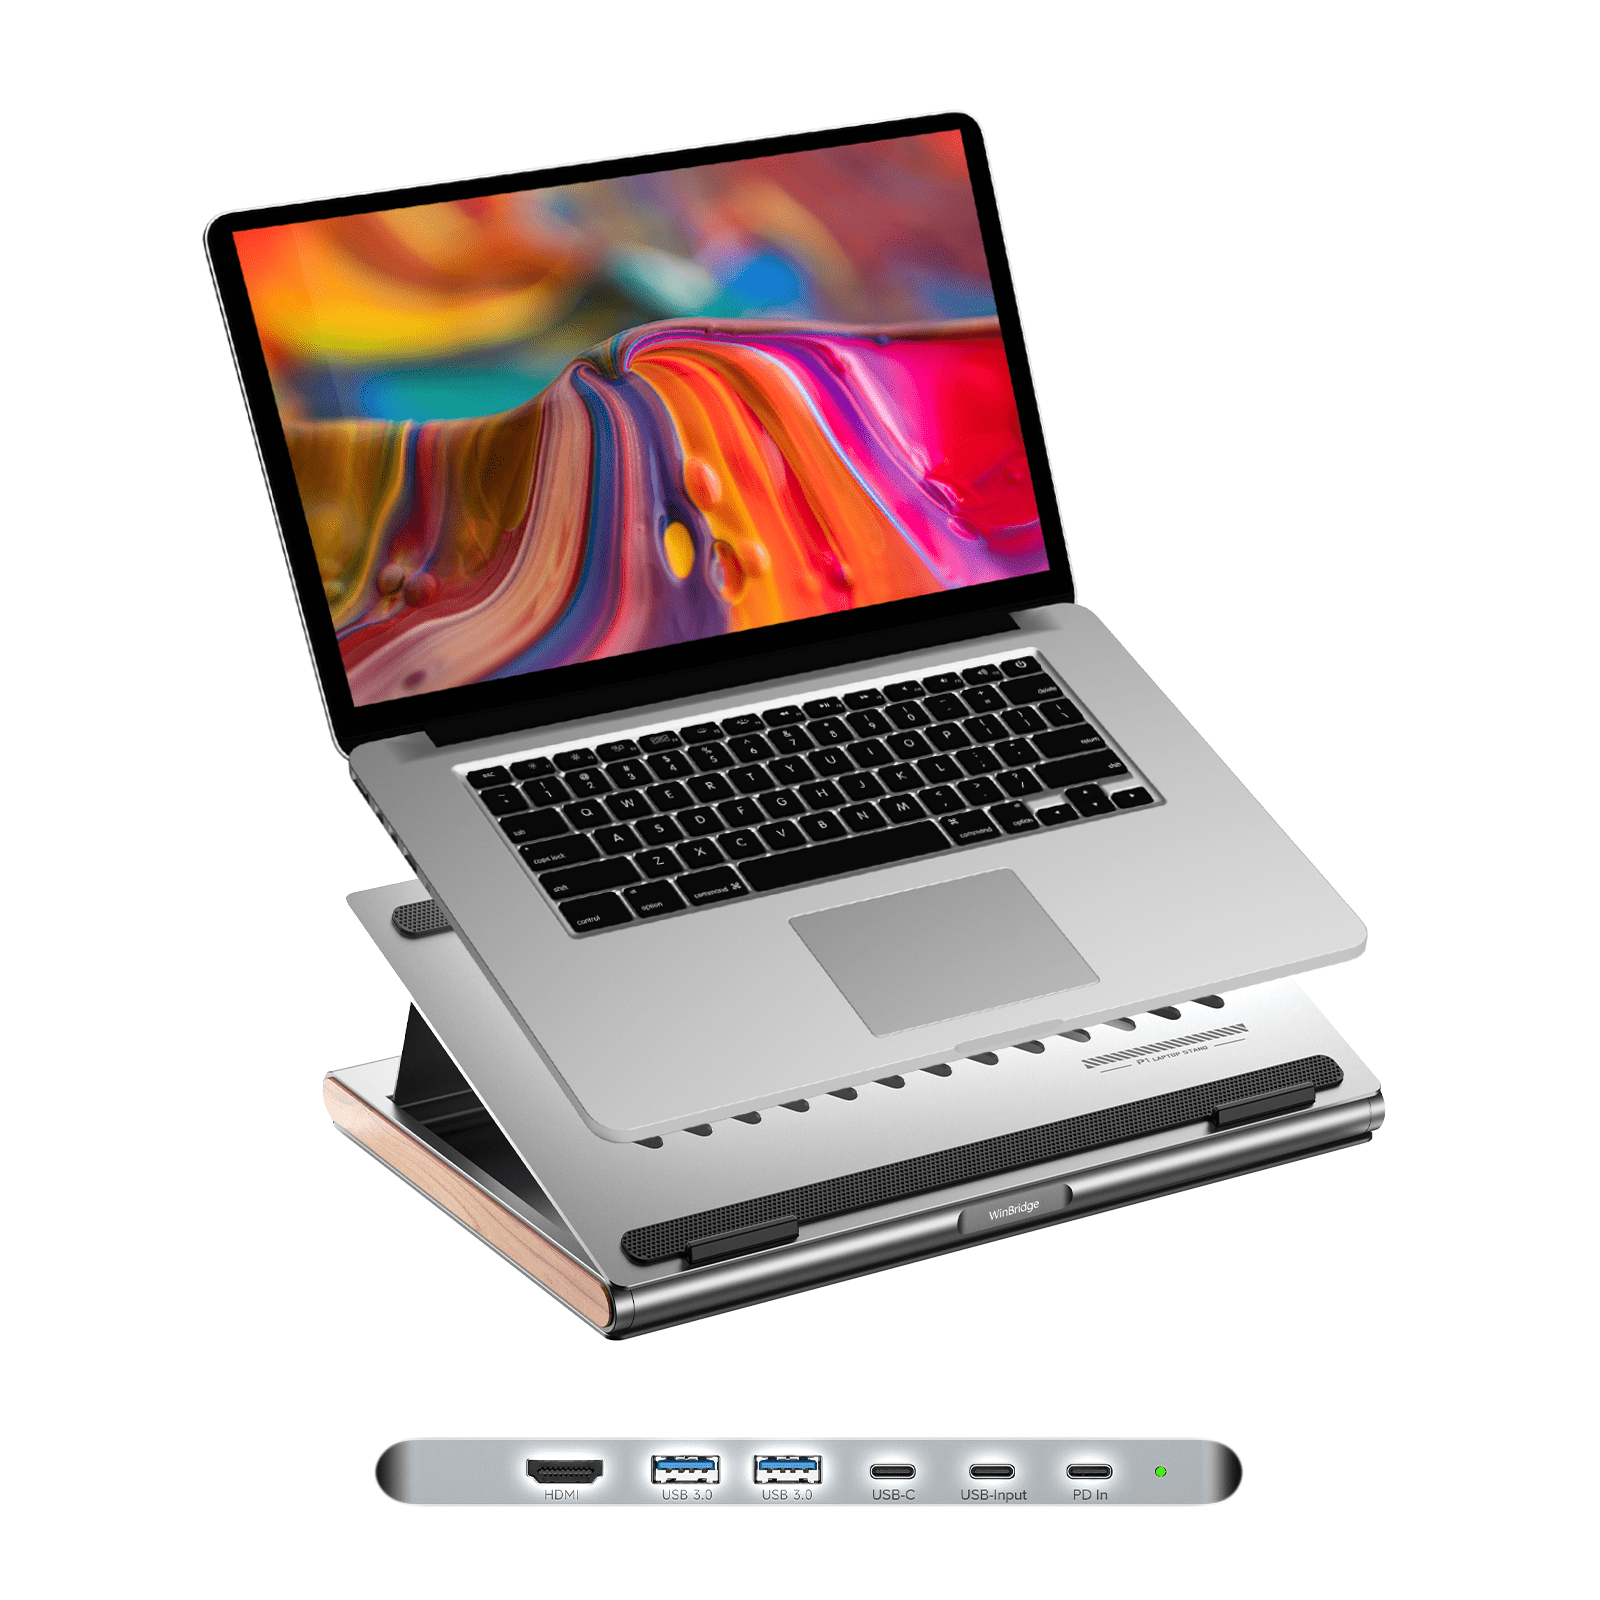 Aluminum Alloy Laptop Stand with 6-in 1 USB C Hub for Desk, 4K HDMI, 2 USB 3.0, 100W PD Charging, Stable & Ventilated, Adjustable Height, Fits All MacBook, Laptops up to 15.6 inches